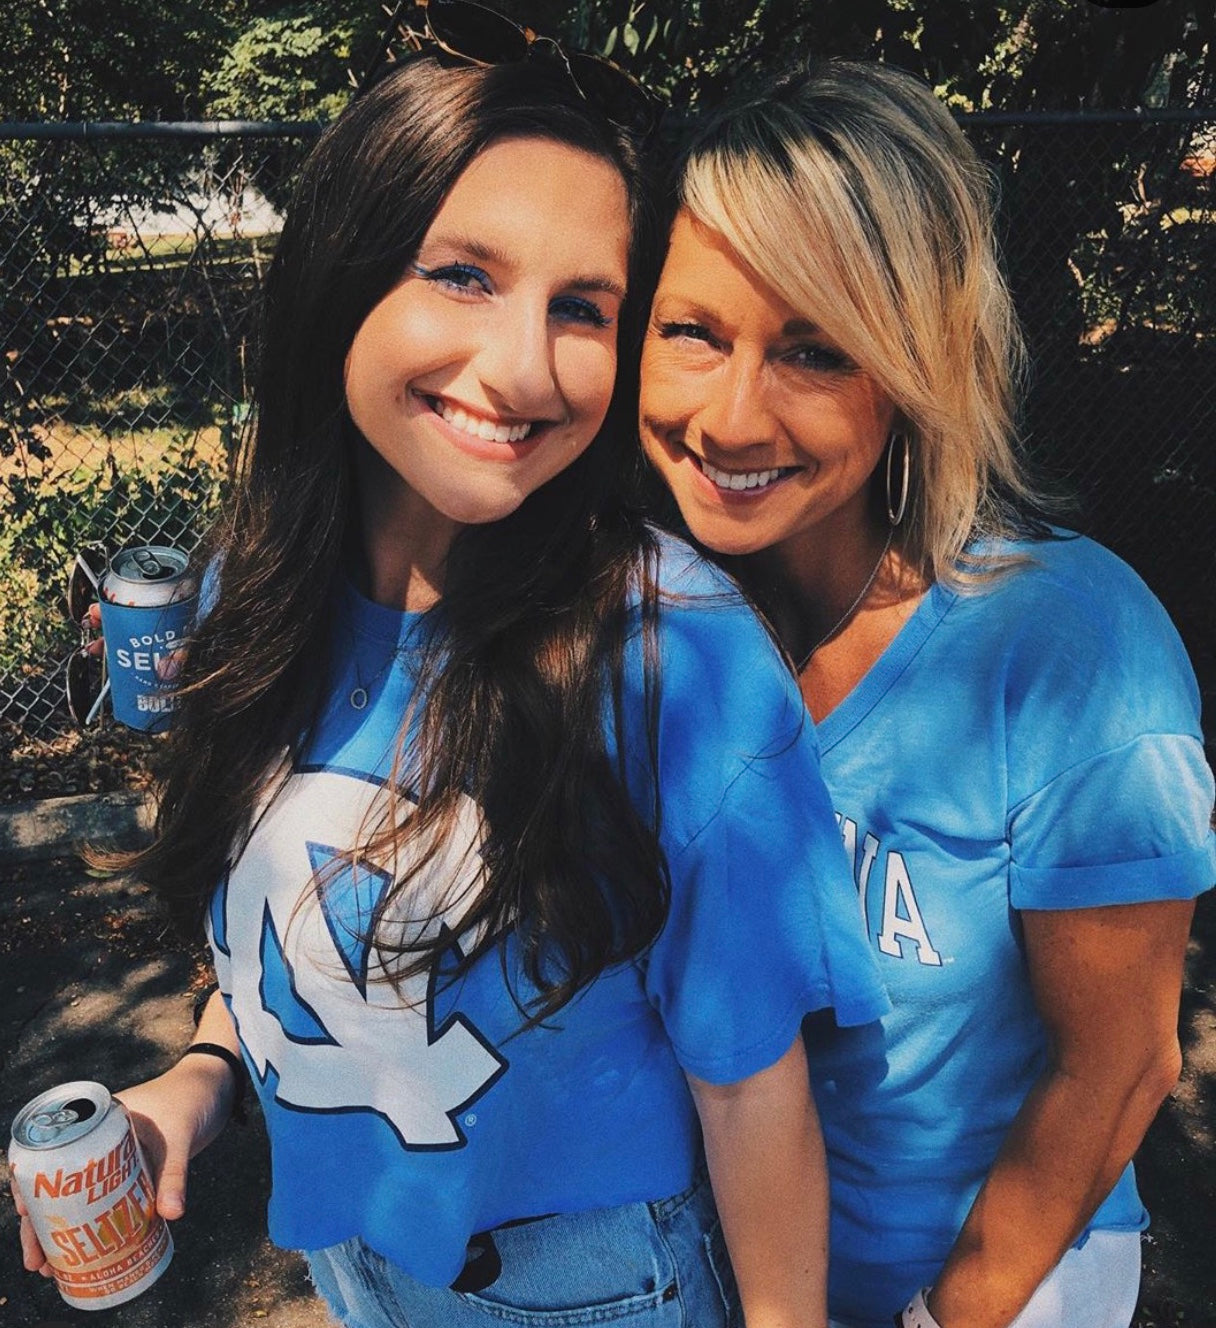 UNC Game Day T-Shirt in Carolina Blue by Champion